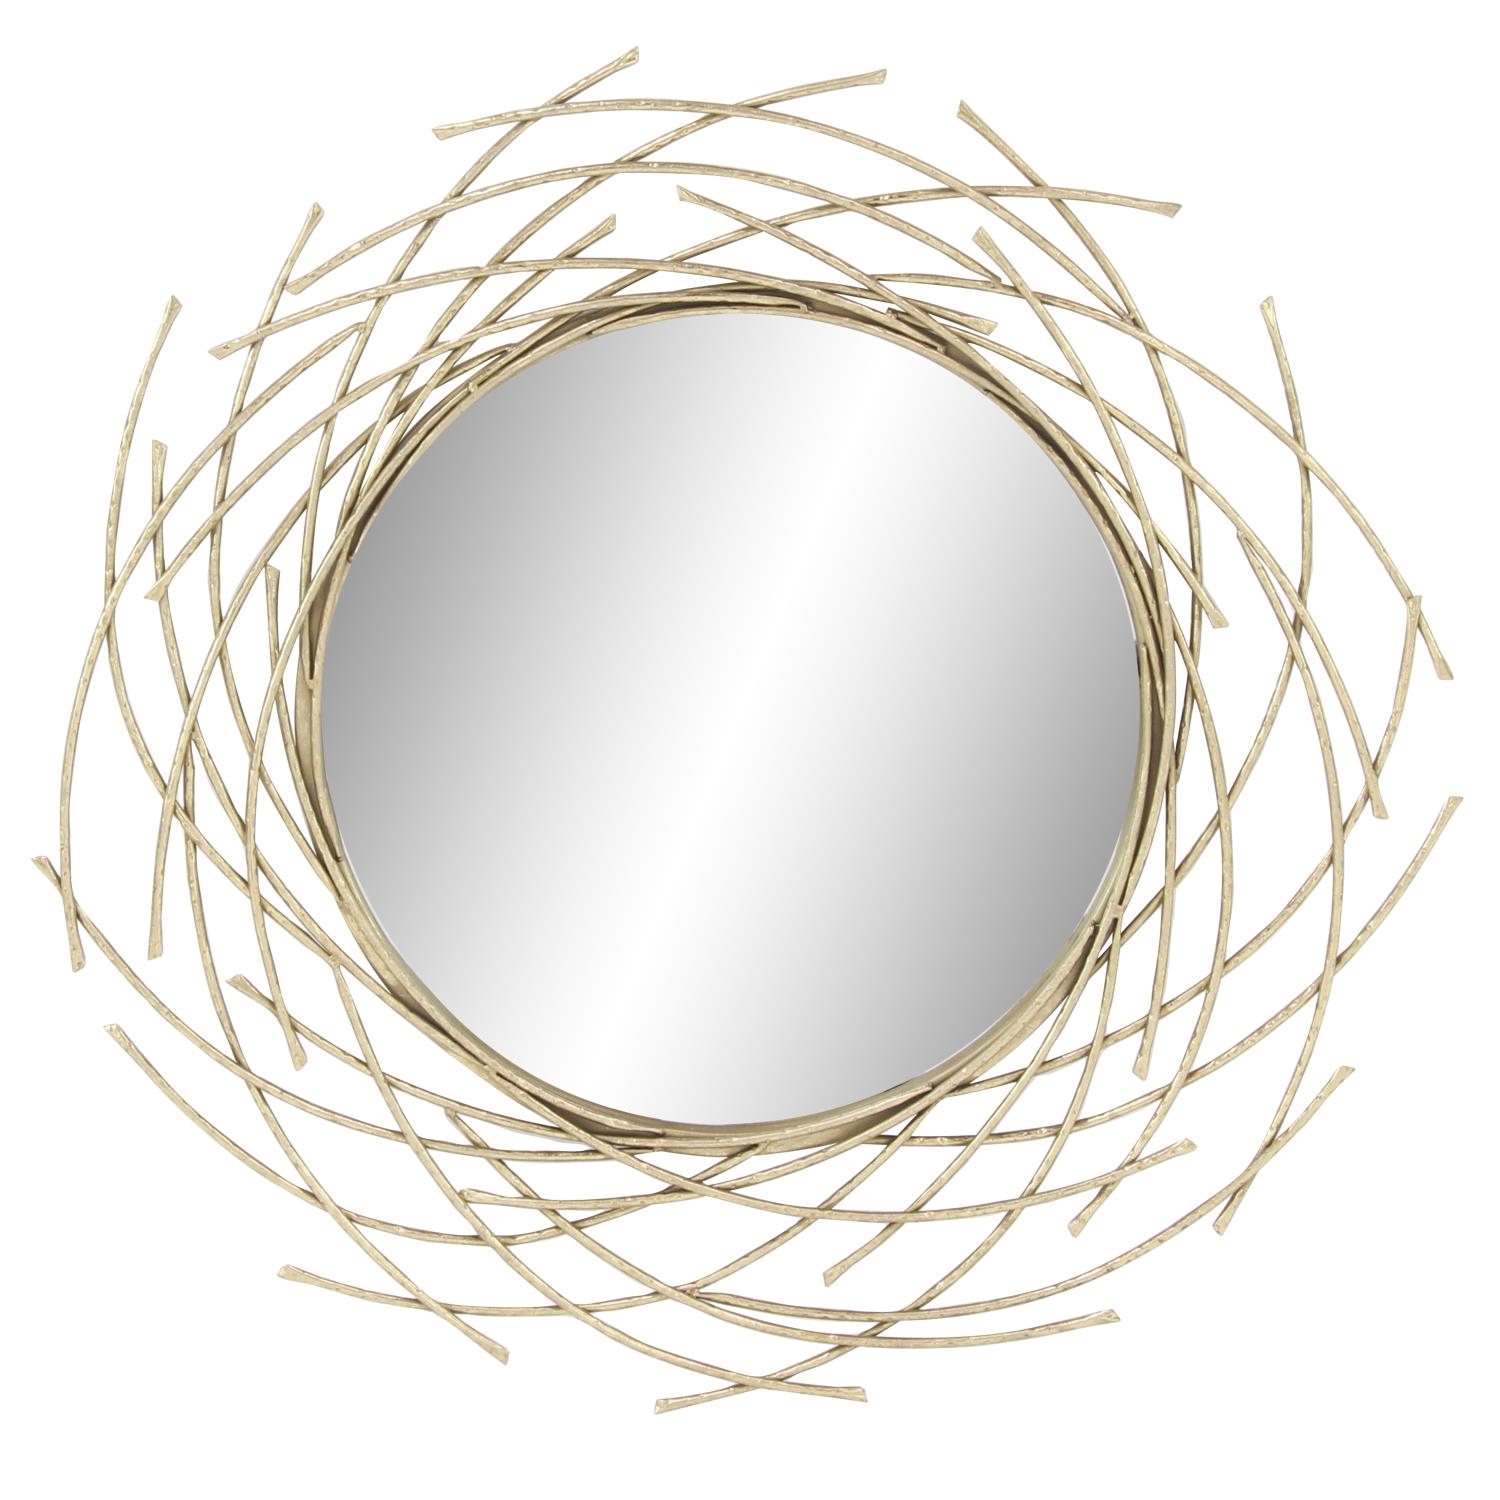 Zimlay CosmoLiving by Cosmopolitan 67098 Glam Style Decorative Round Metal Wall Mirror with Twig Silhouette Frame | 39â? x 39â?